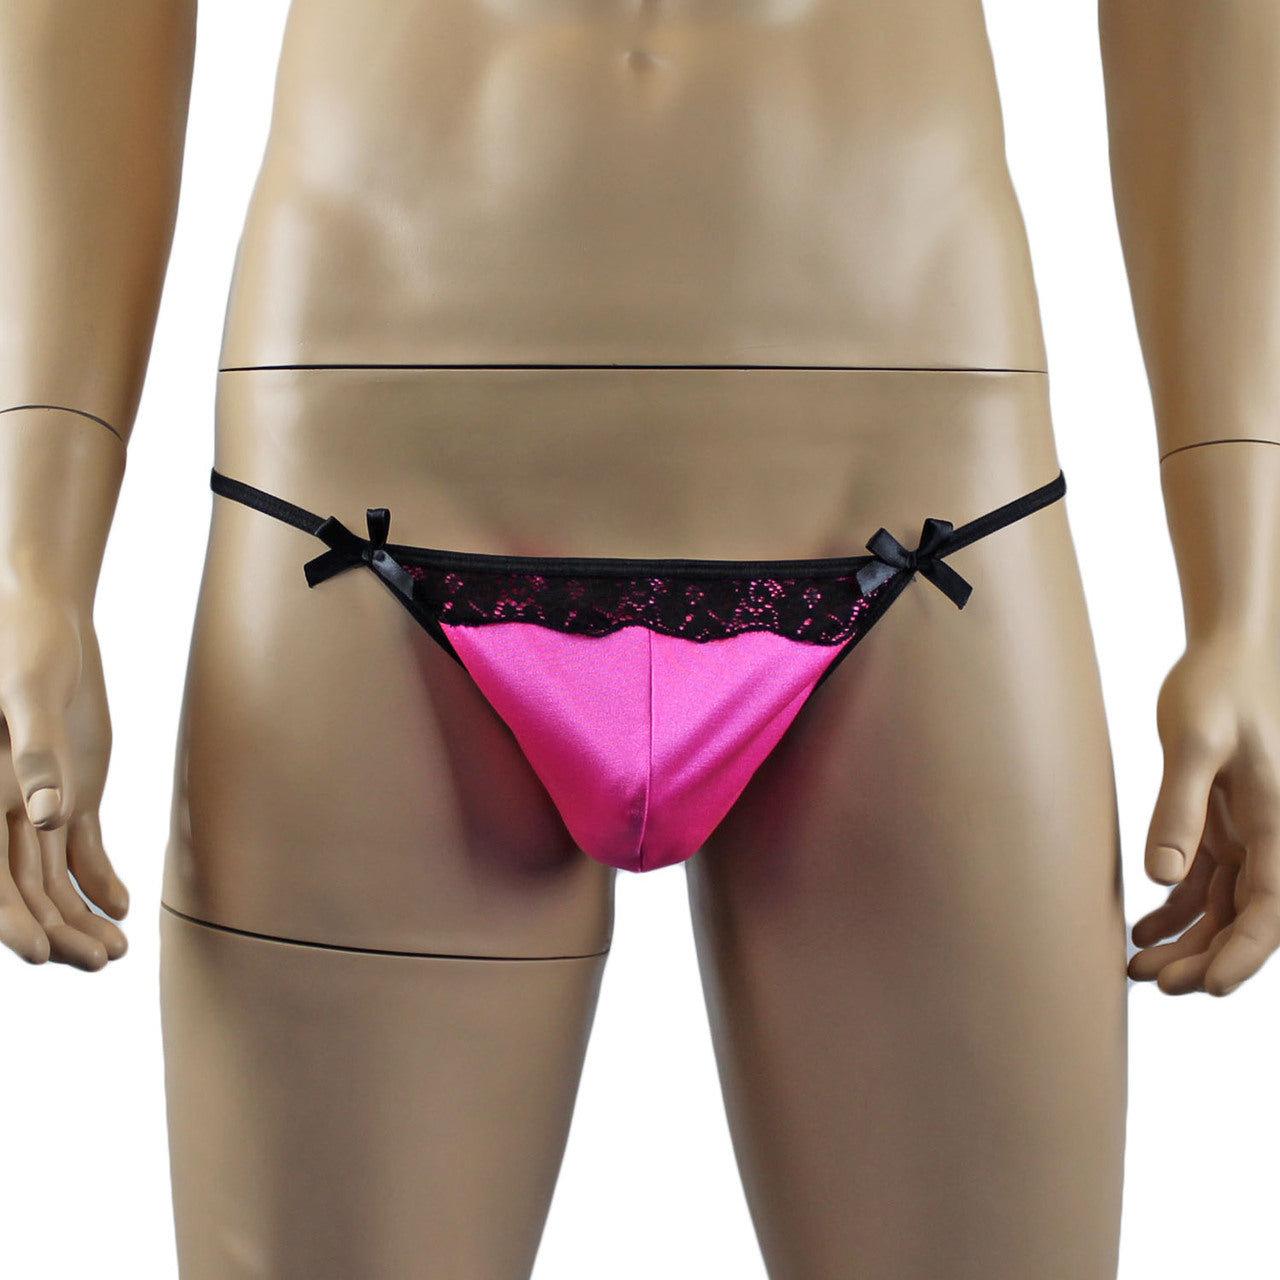 Mens Lucy Feminine Satin, Lace and Bow Pouch G string Hot Pink and Black